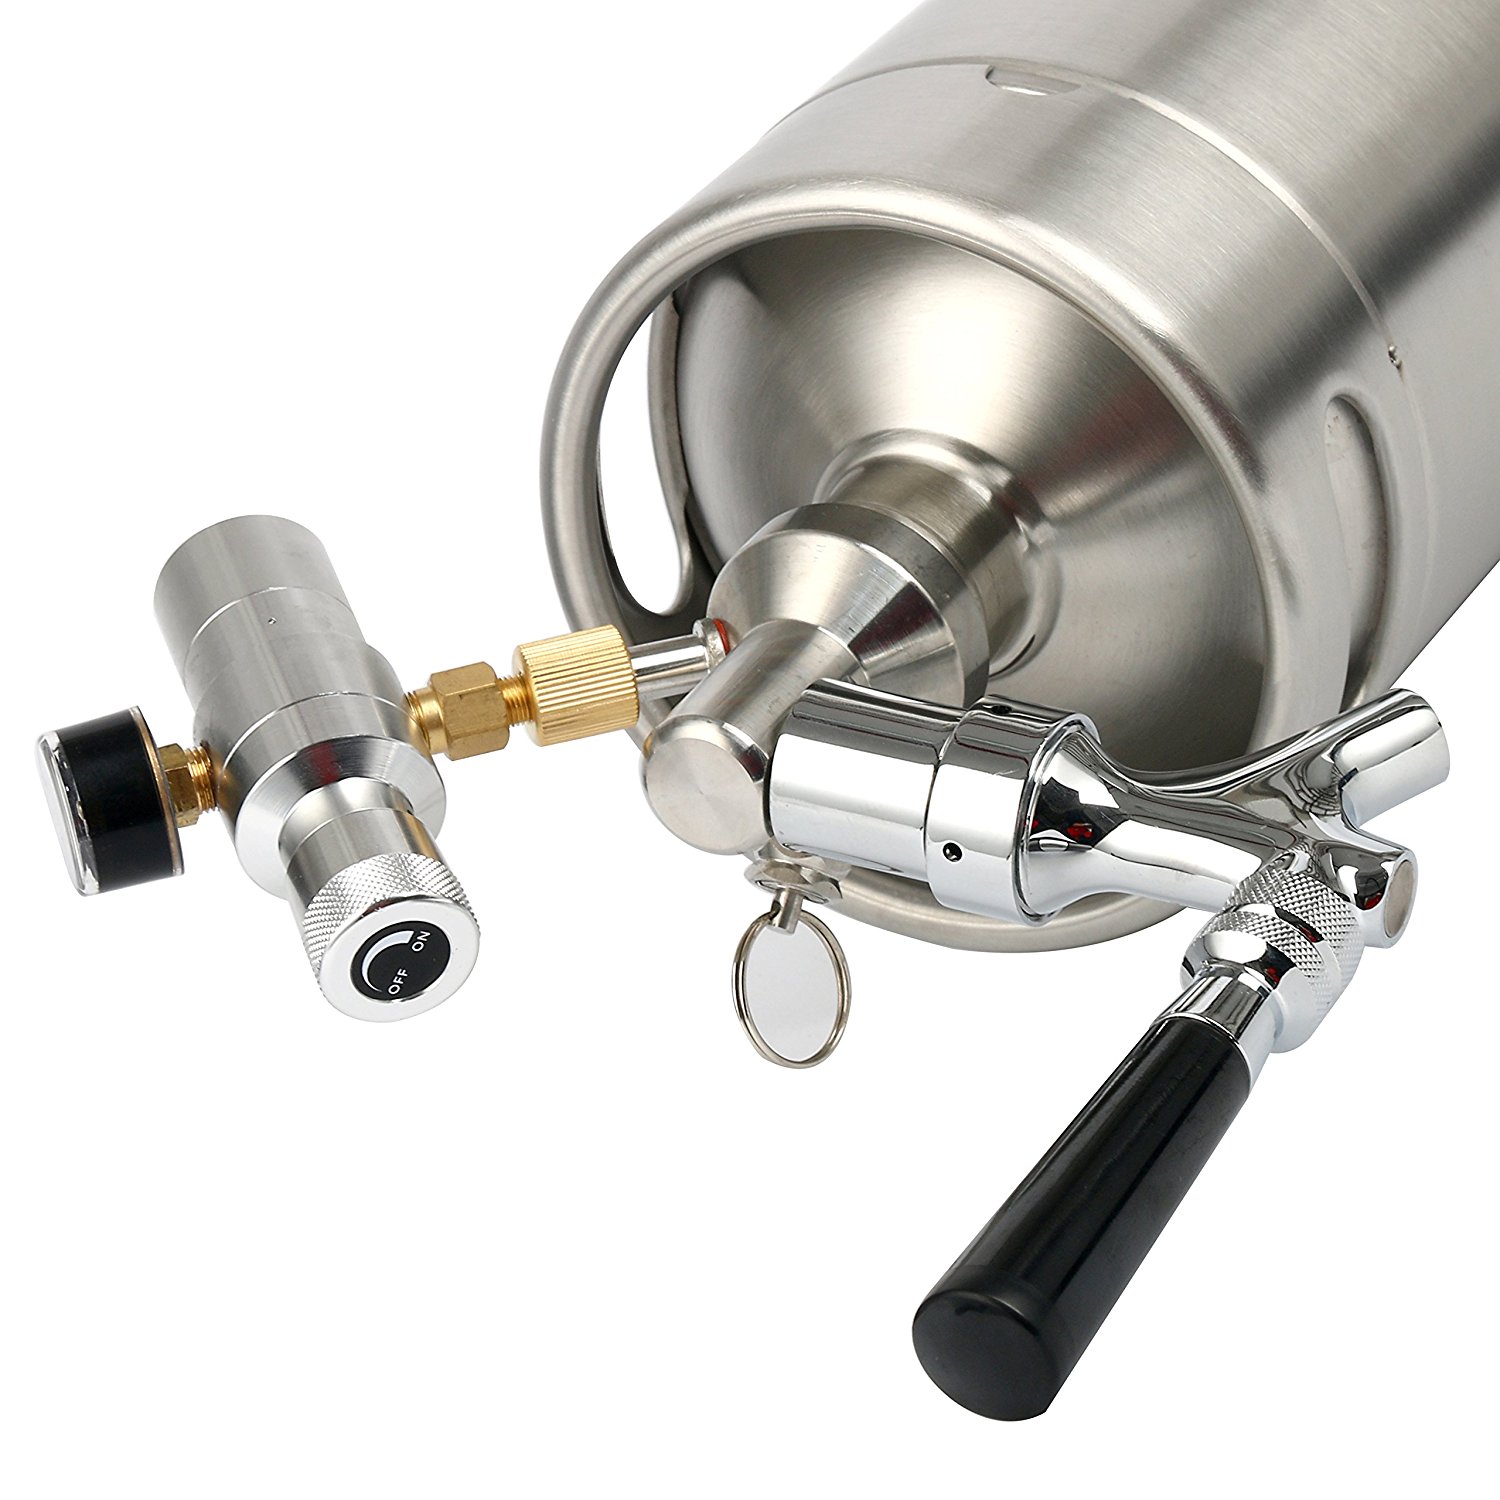 Where To Get Co2 For A Kegerator